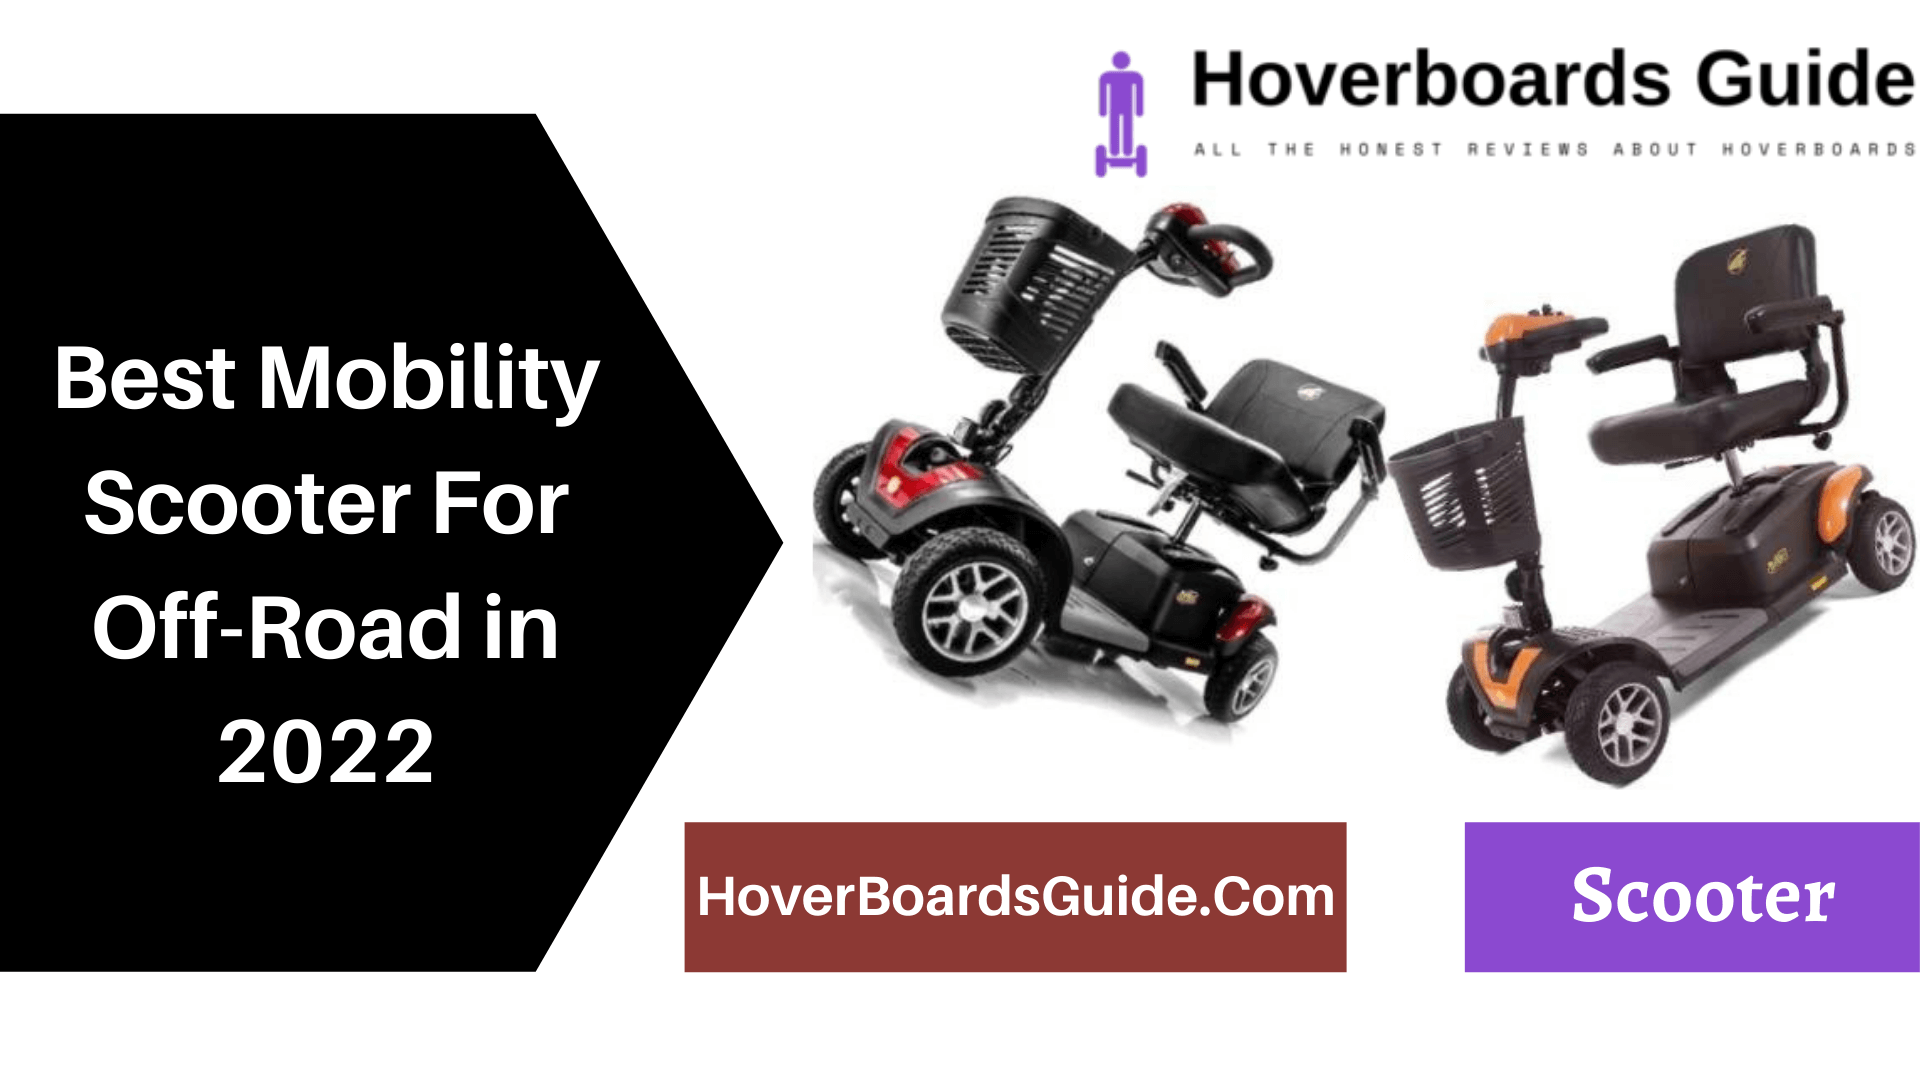 Best Mobility Scooter For Off-Road in 2022